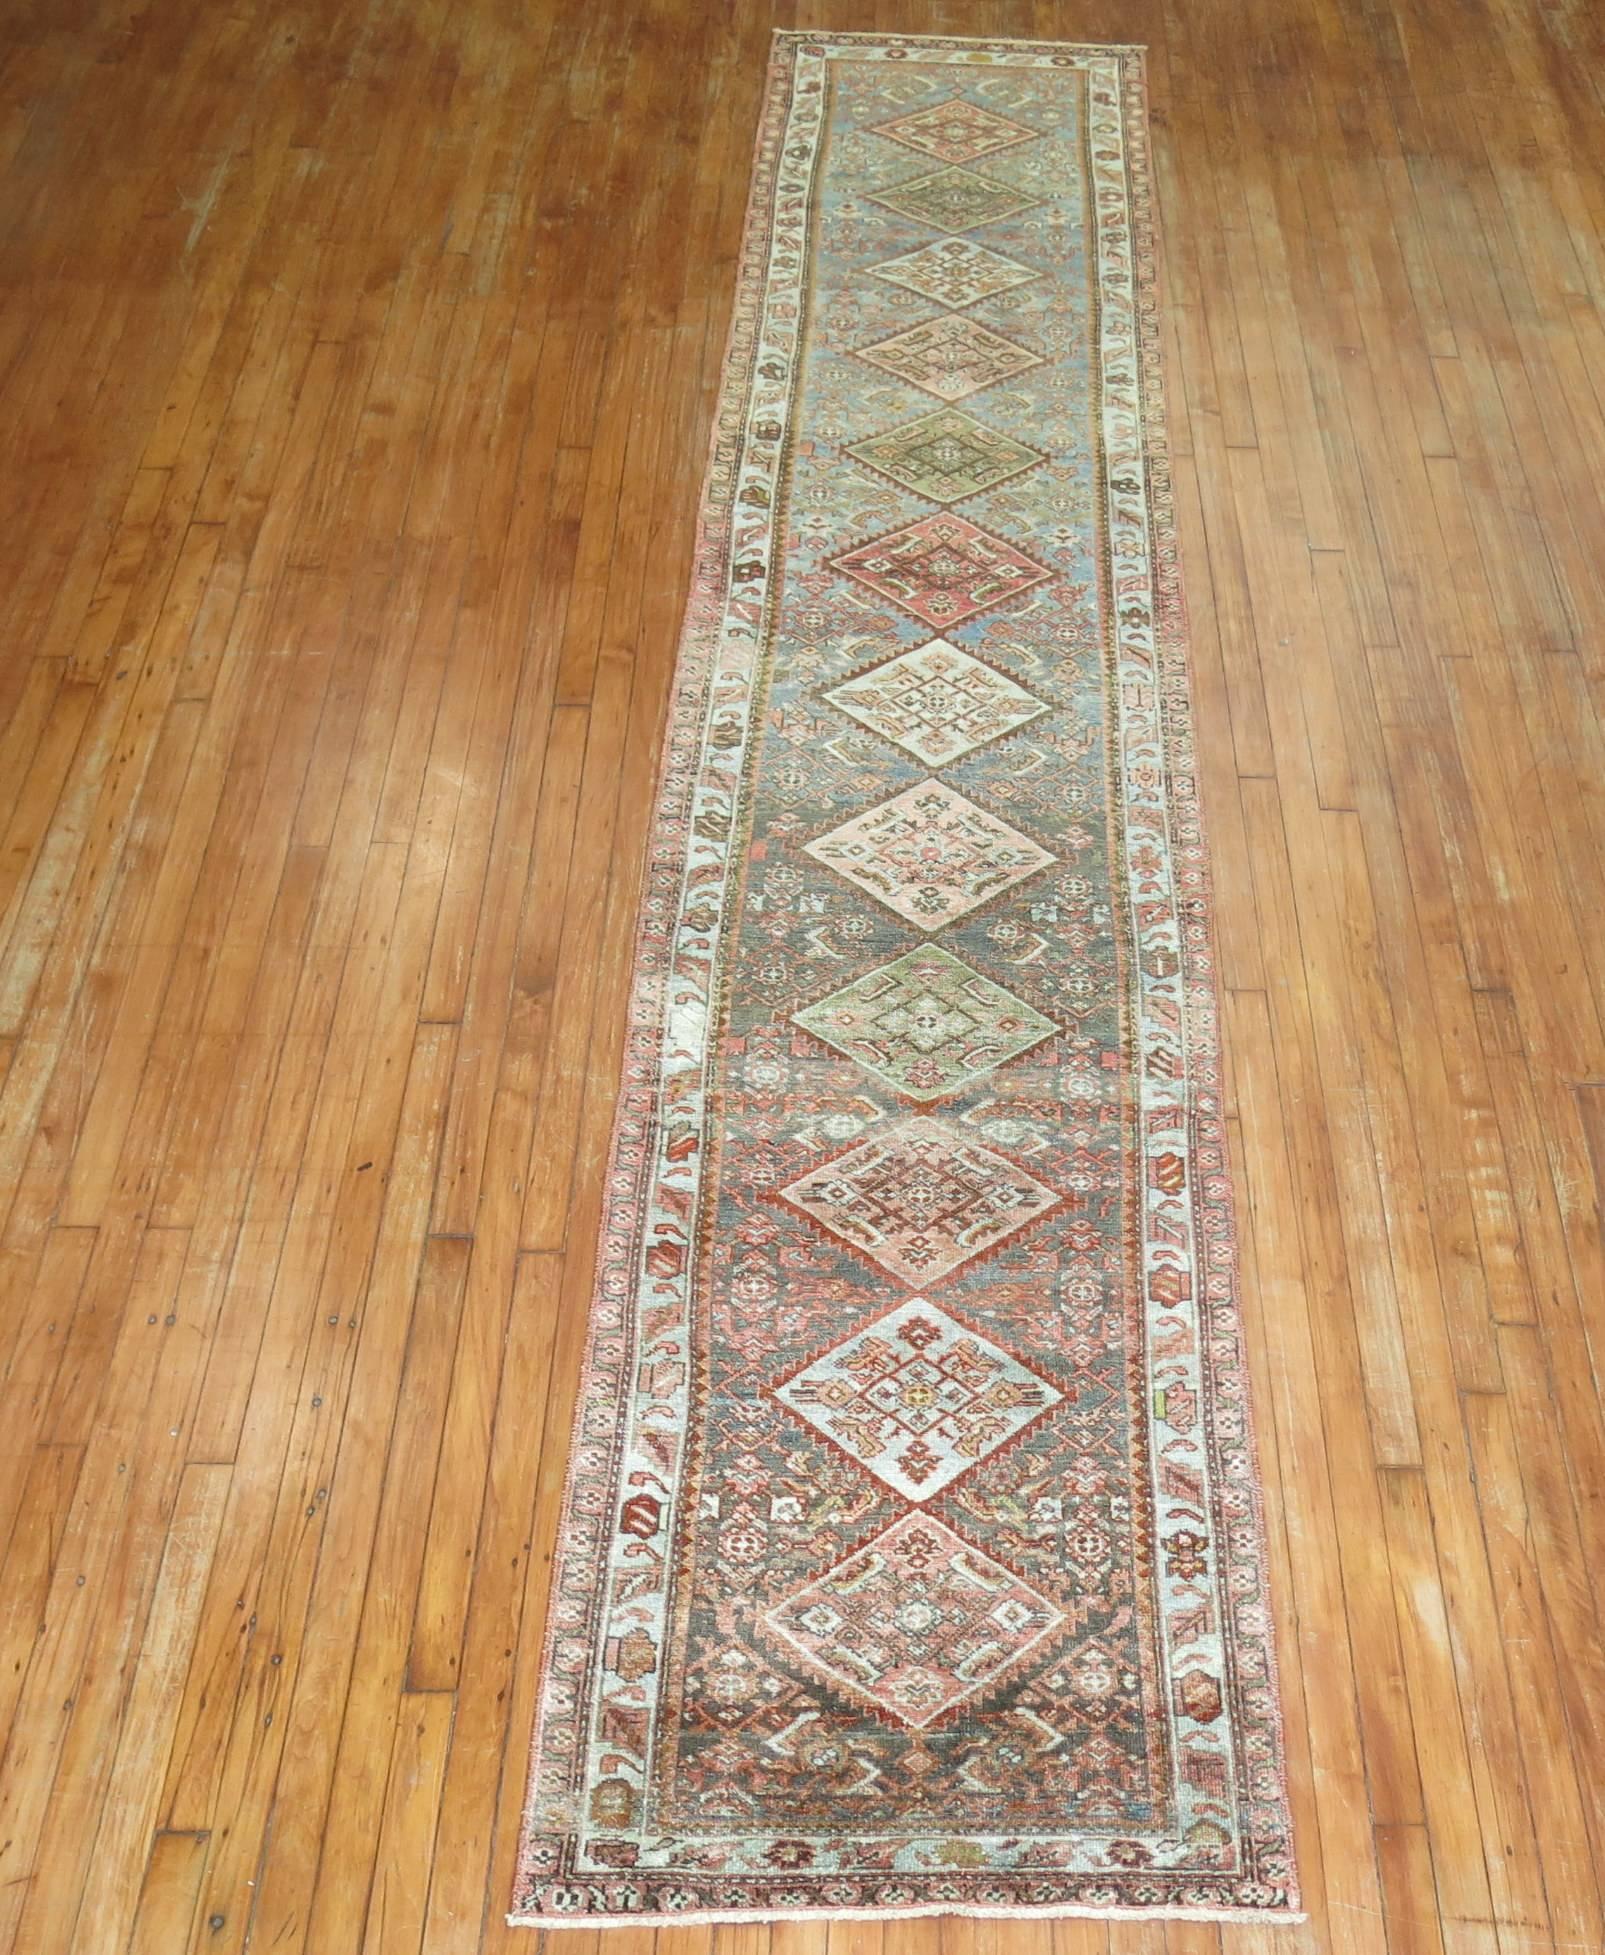 An early 20th-century Persian Malayer runner.

Measures: 2'8'' x 13'3''.